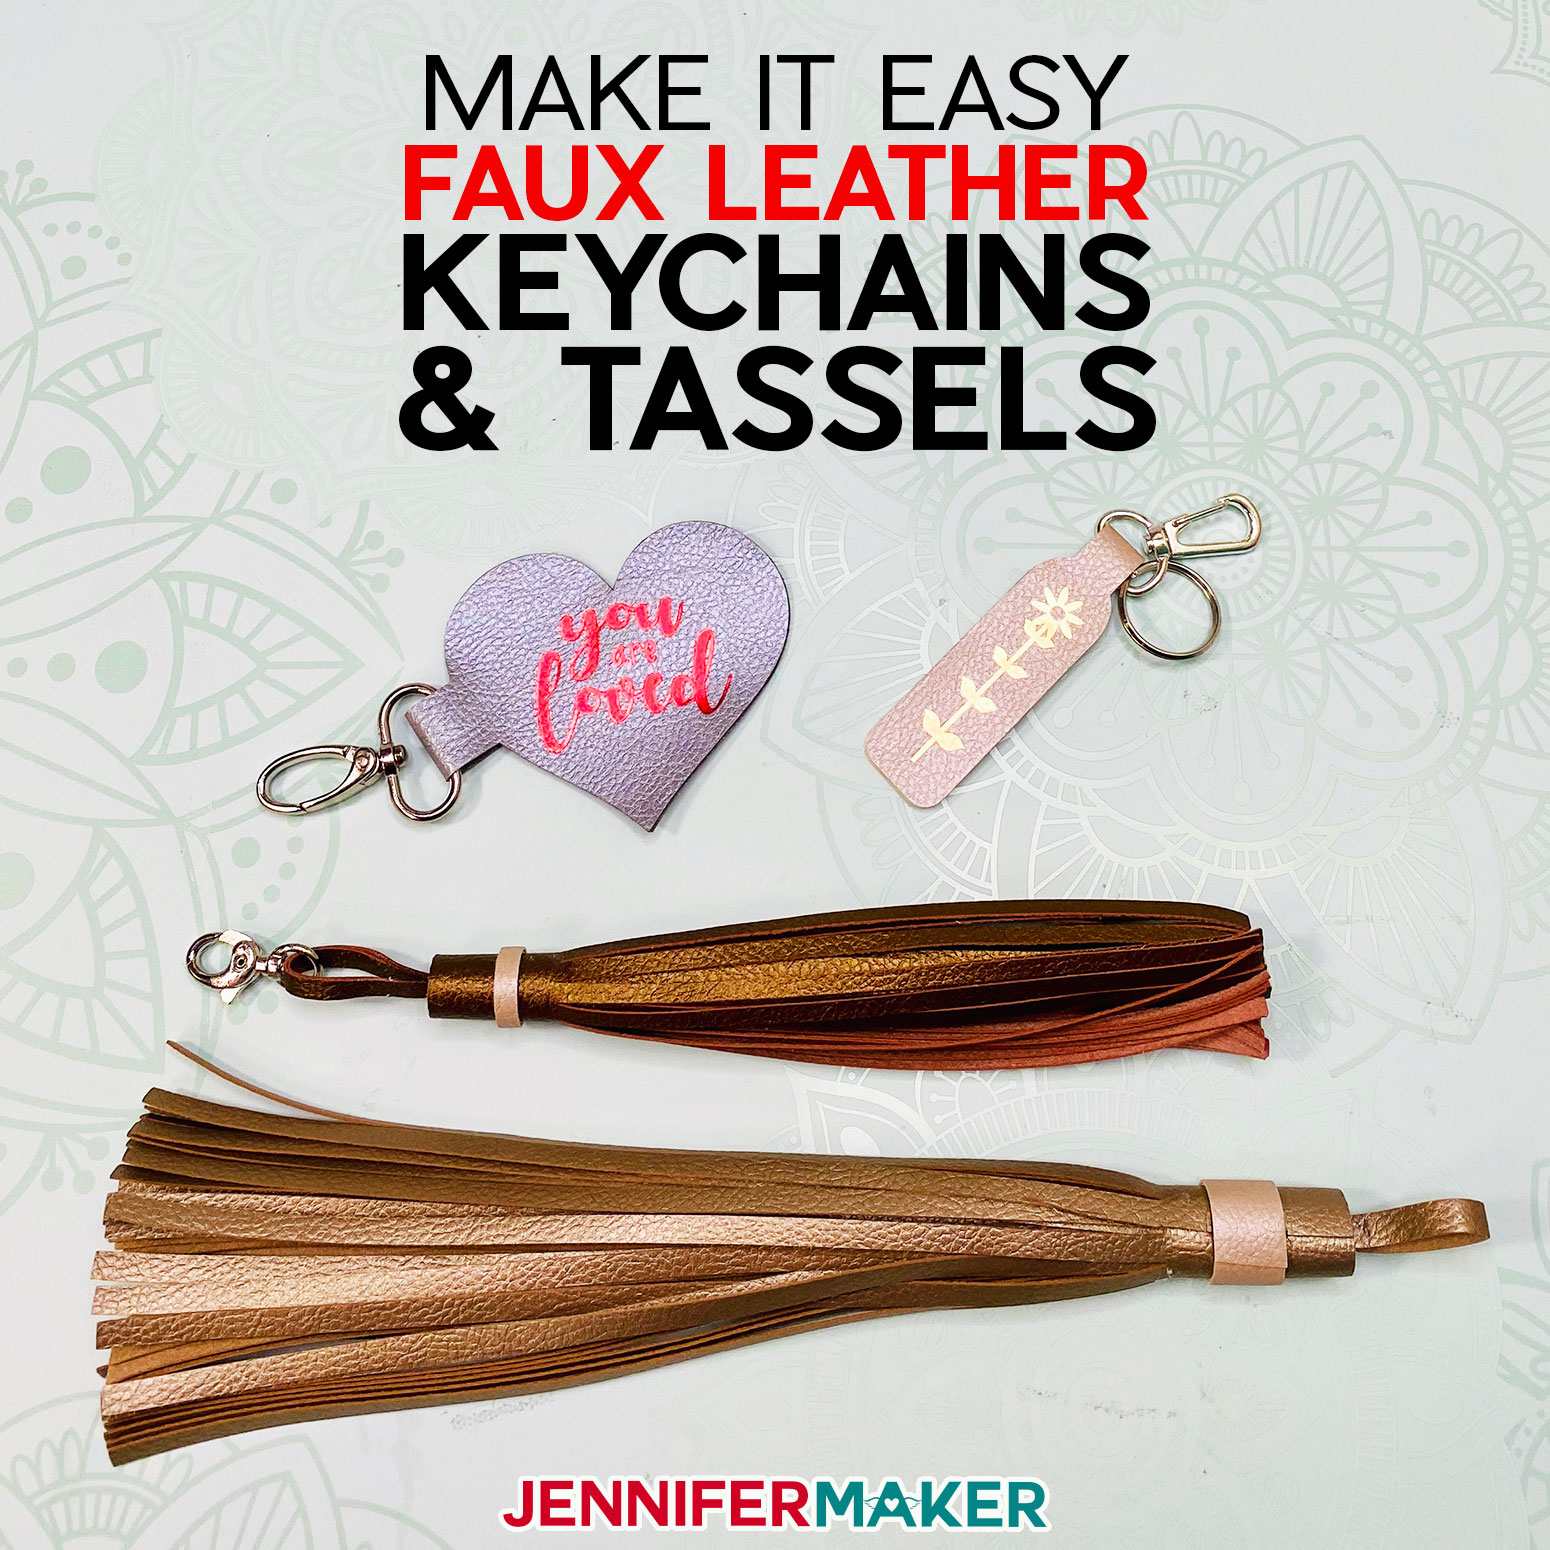 Easy Keychains and Tassels from Faux Leather - Jennifer Maker